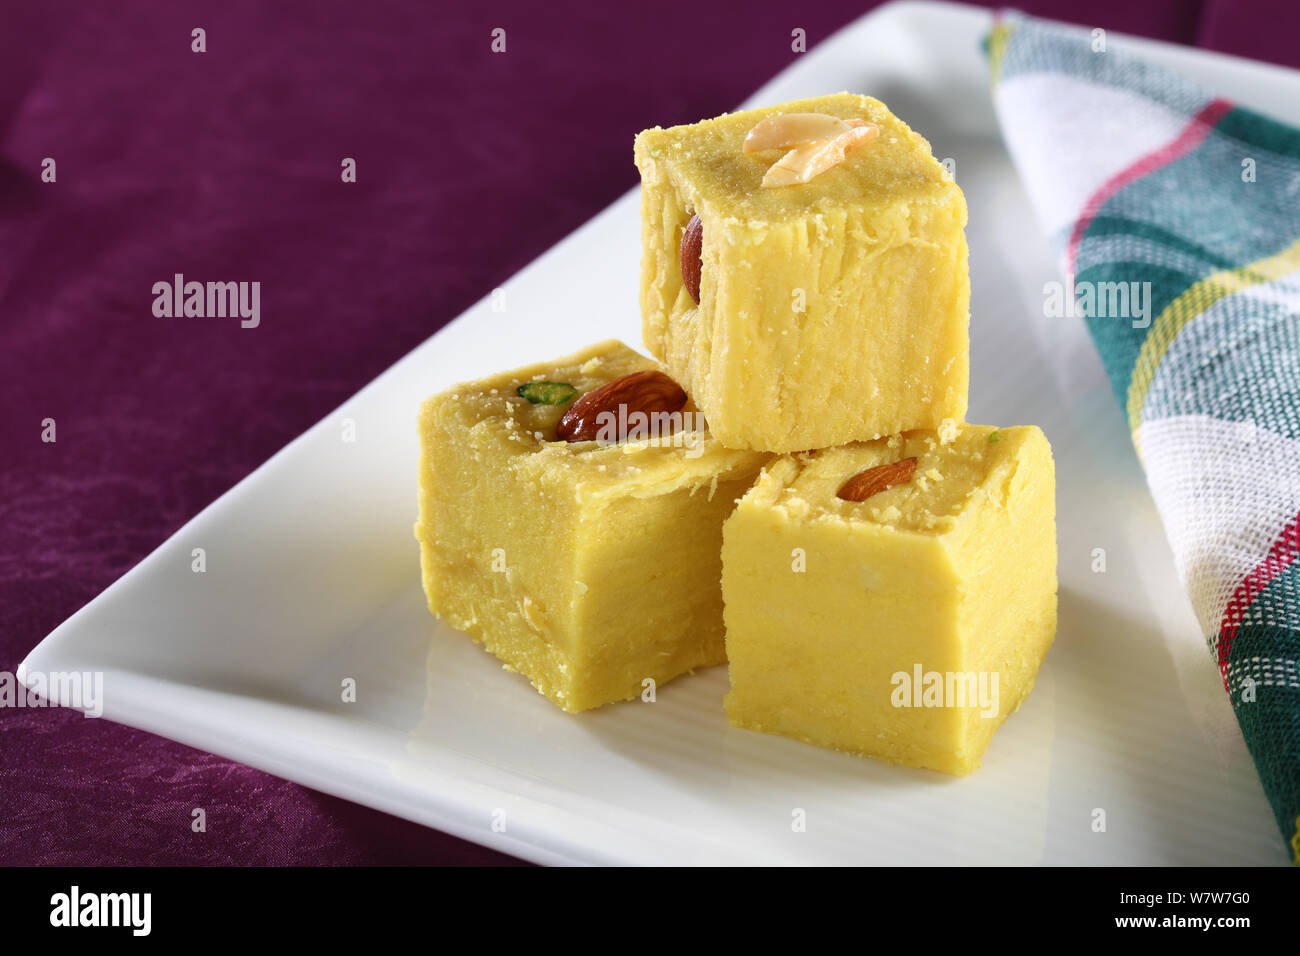 Soan papdi served in a plate Stock Photo